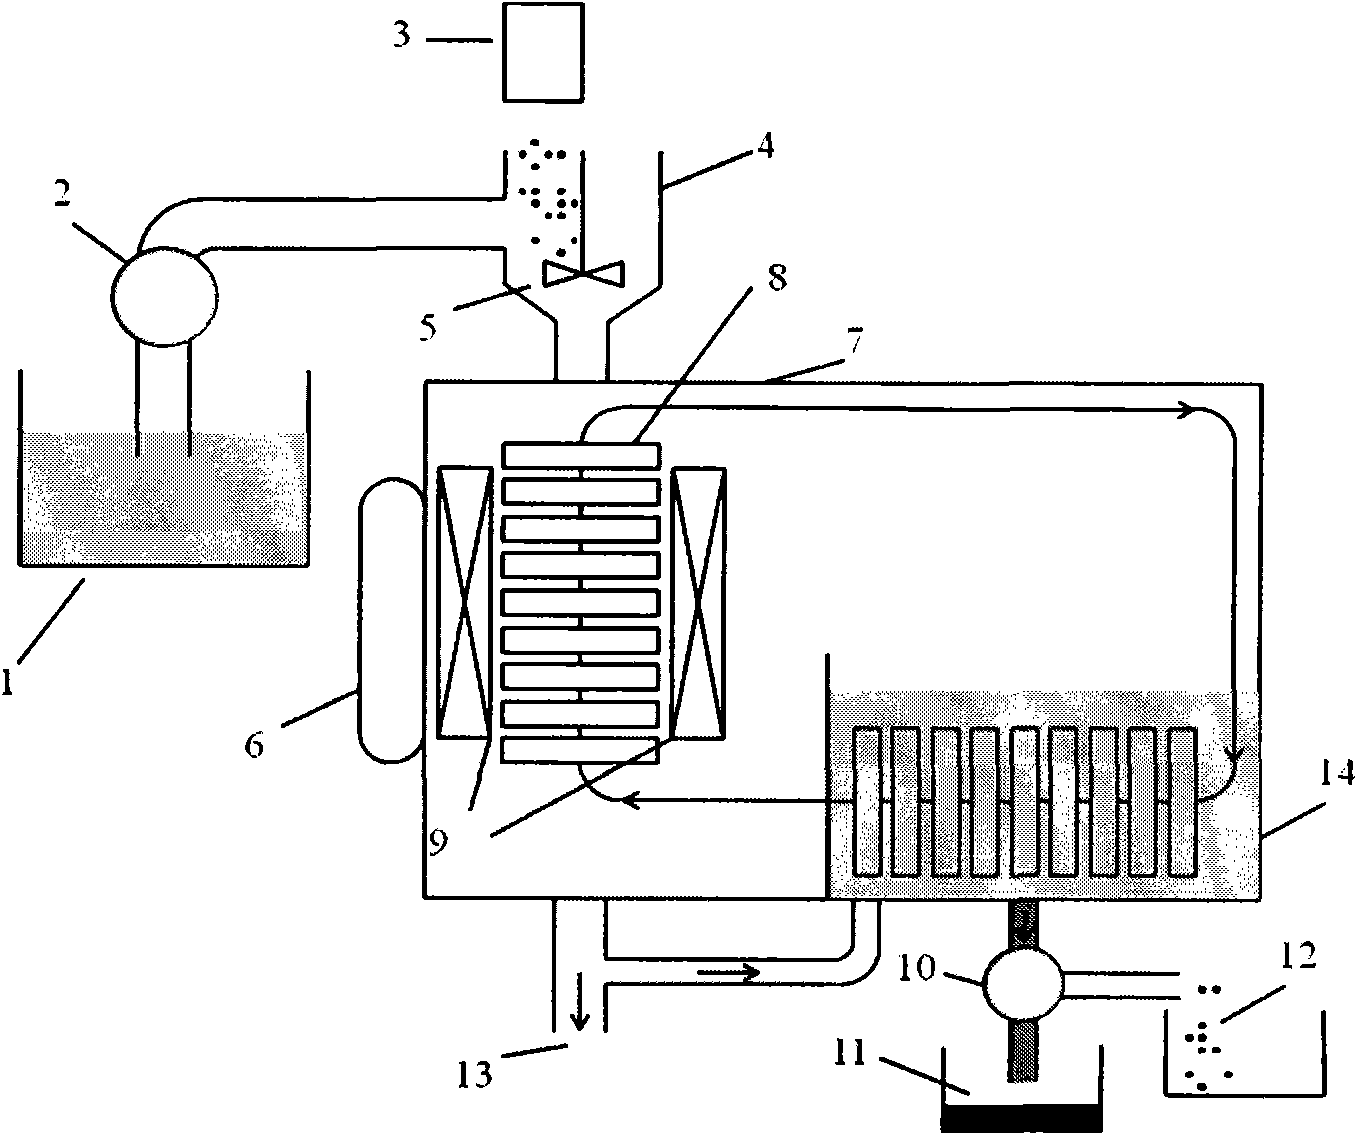 Processing equipment for separating waste water by superconducting magnet